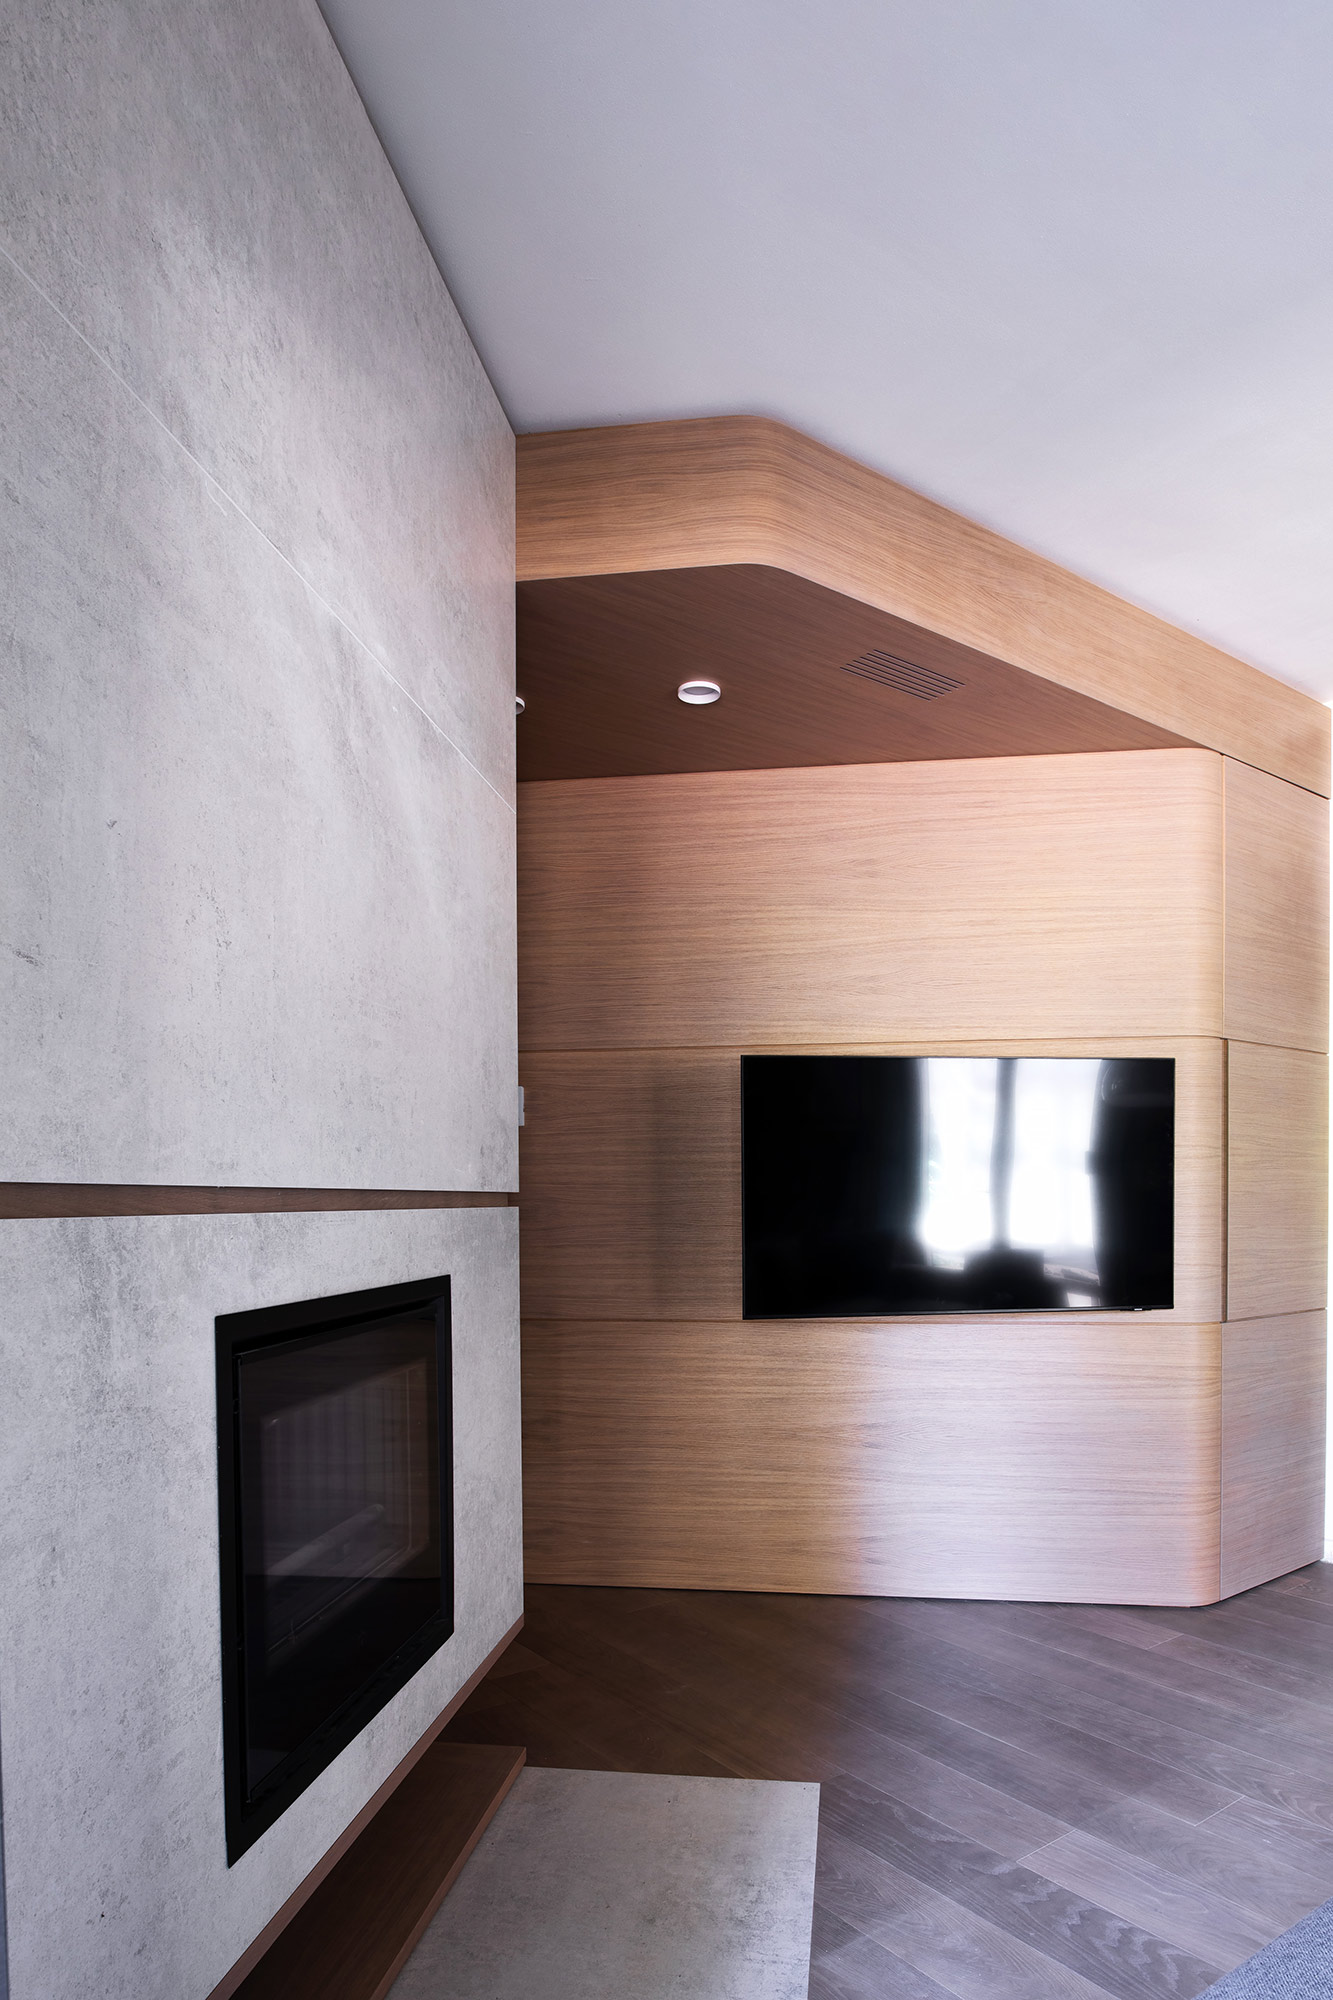 Image of villa italiana mariano cornese dekton 15 in One material, a range of uses: this modern house features Dekton Lunar in the fireplace, kitchen and bathroom - Cosentino